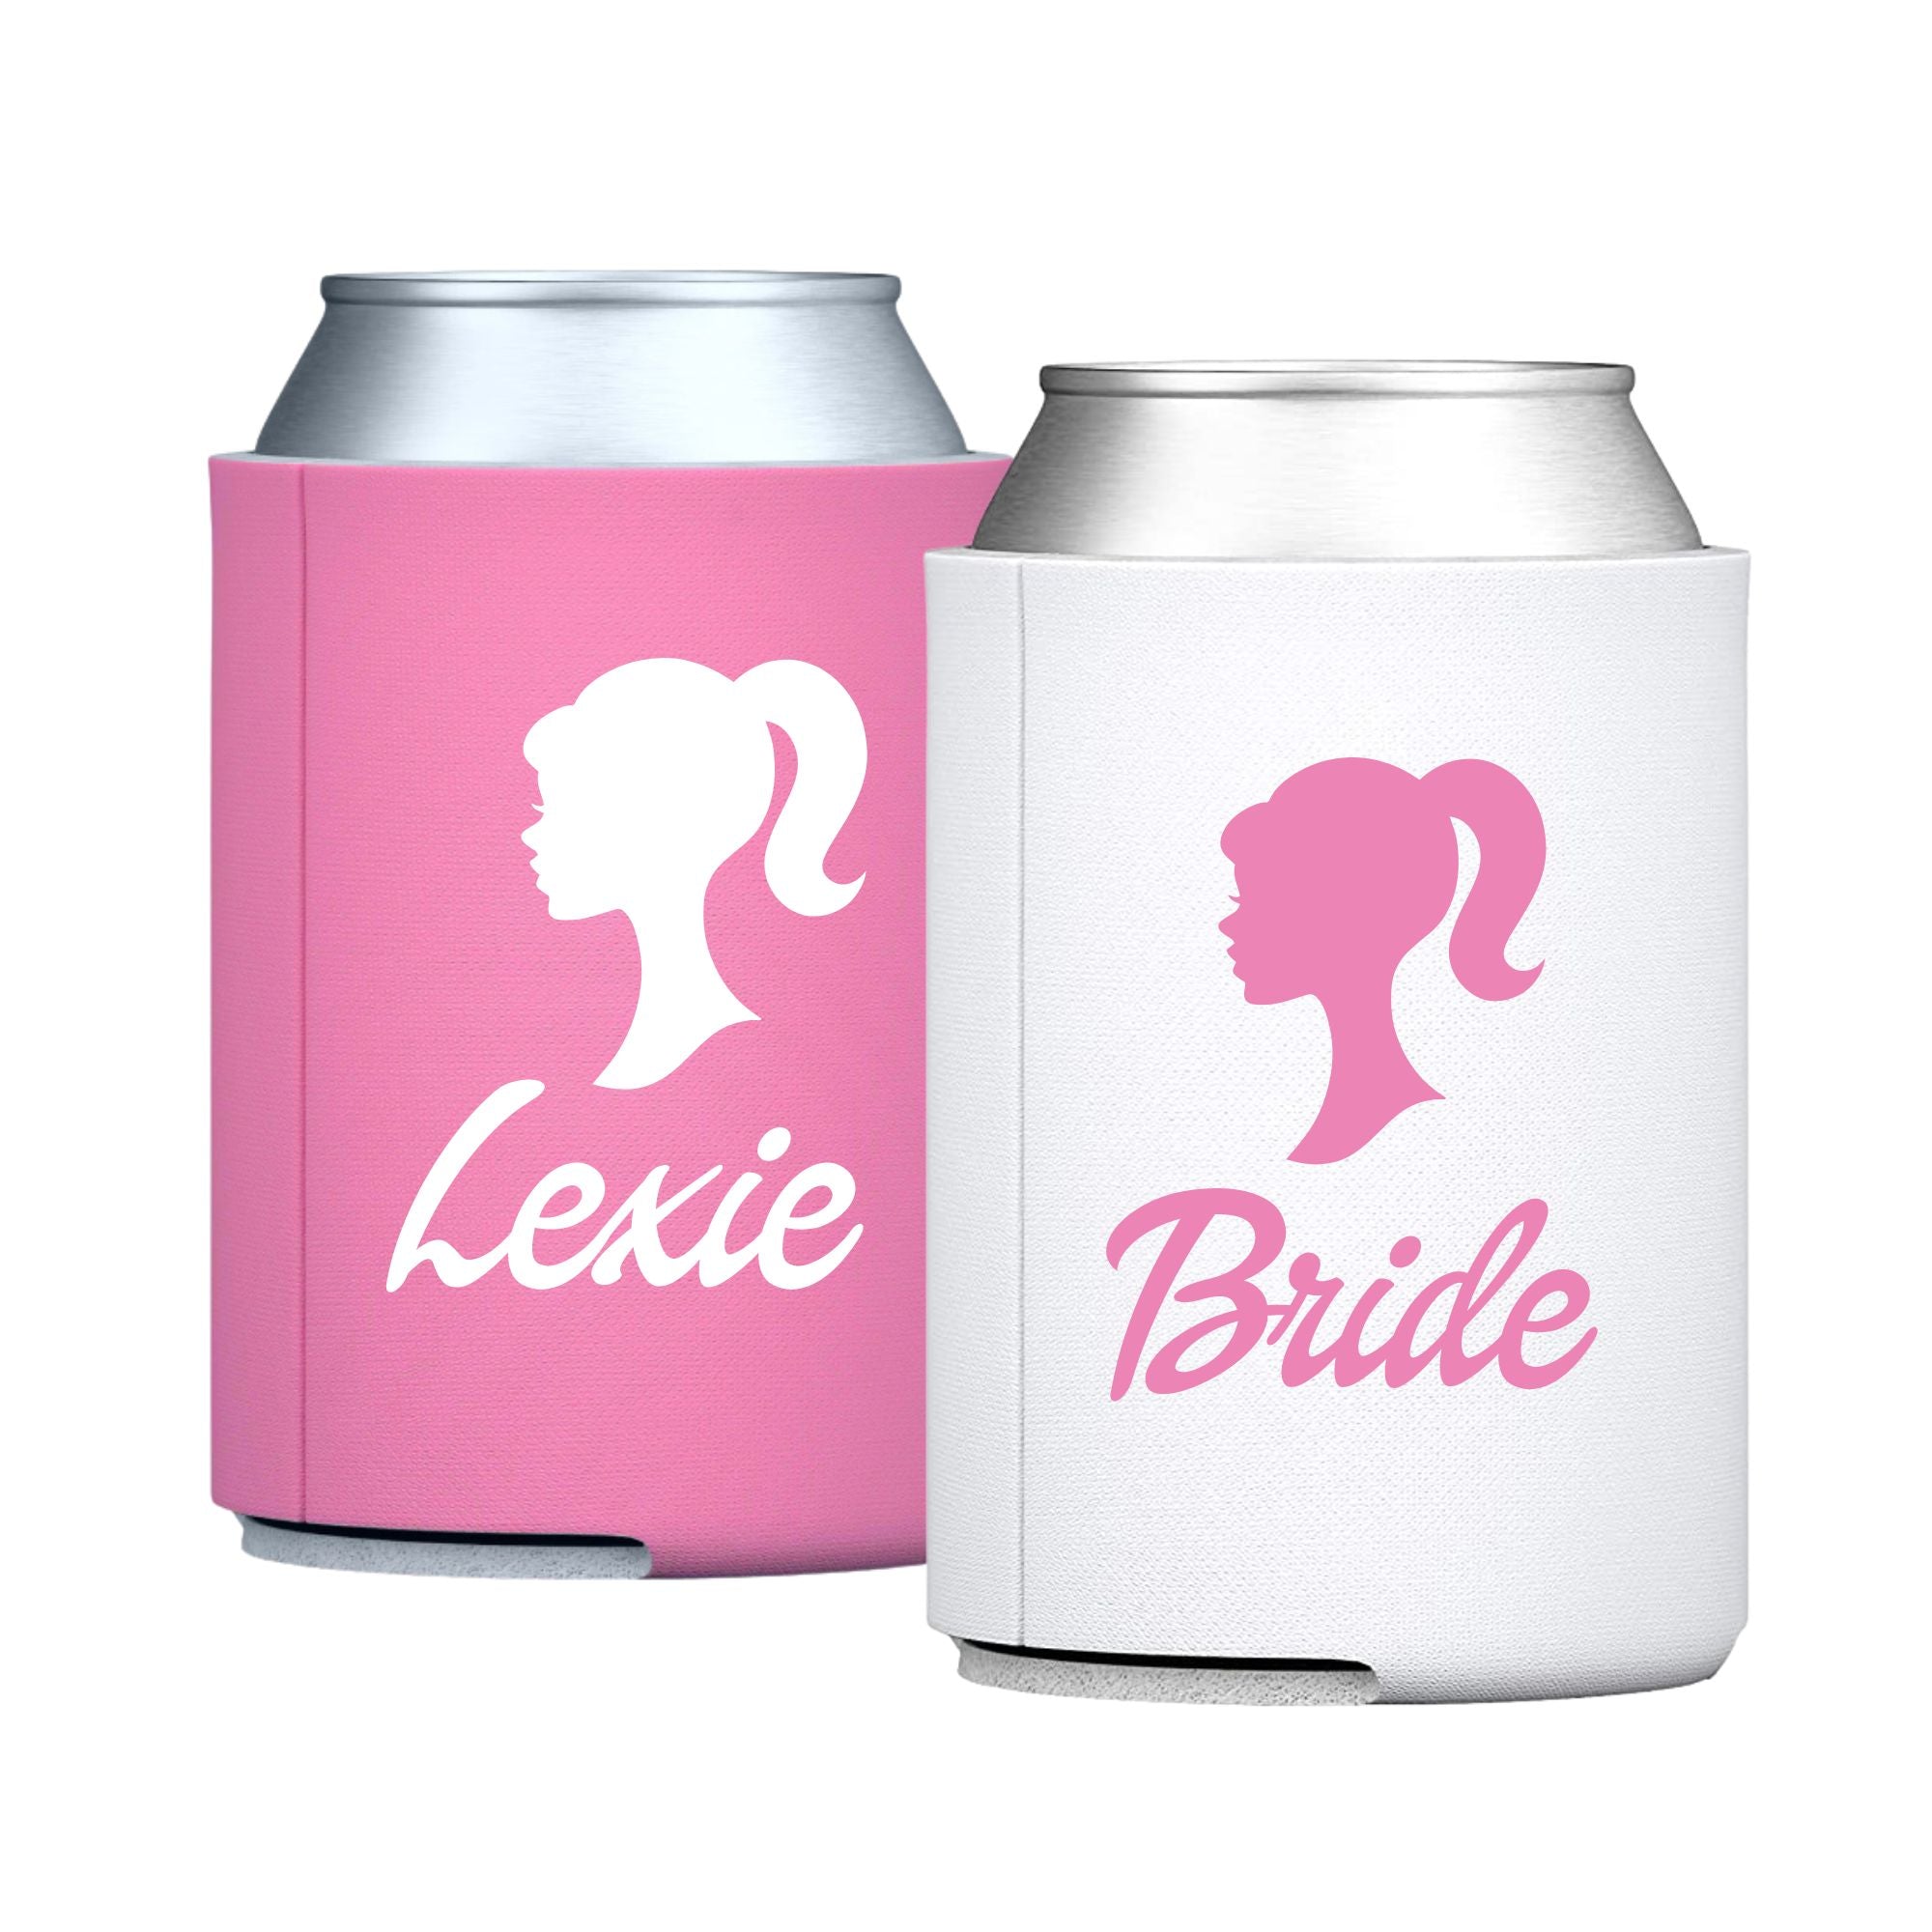 Let's Bach Party - Silhouette Can Coolers - Sprinkled With Pink #bachelorette #custom #gifts